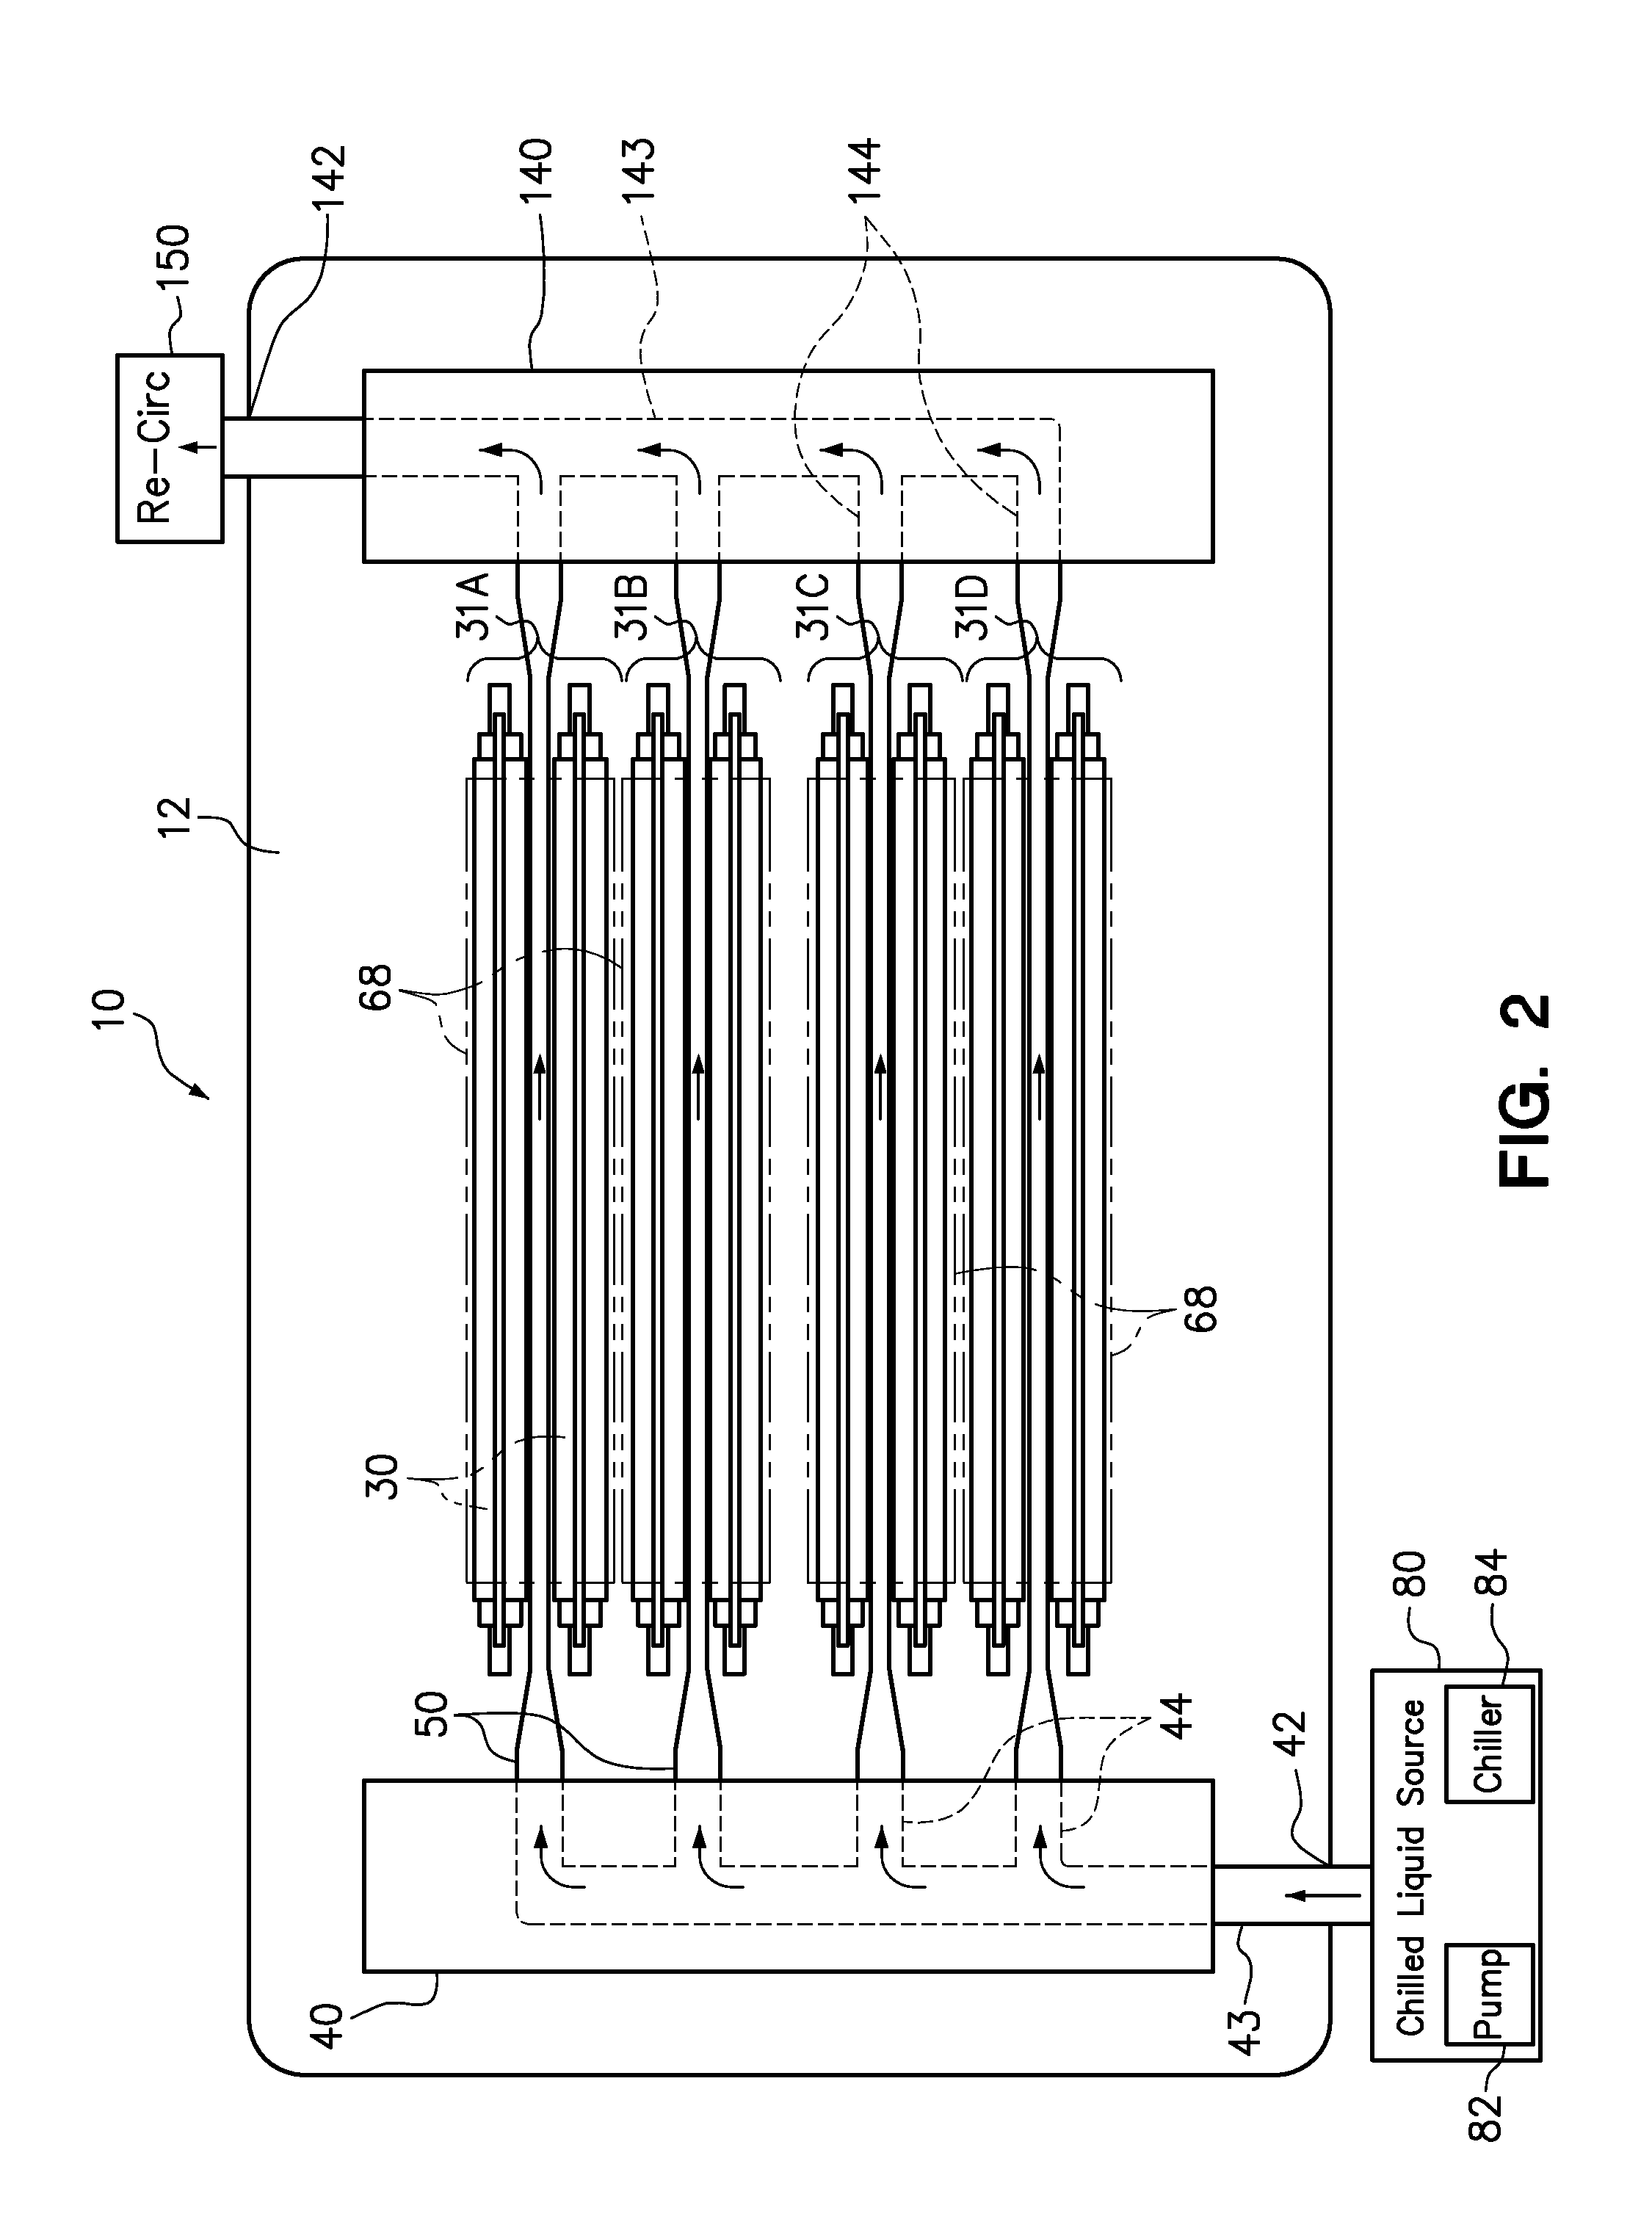 Liquid-cooled memory system having one cooling pipe per pair of dimms